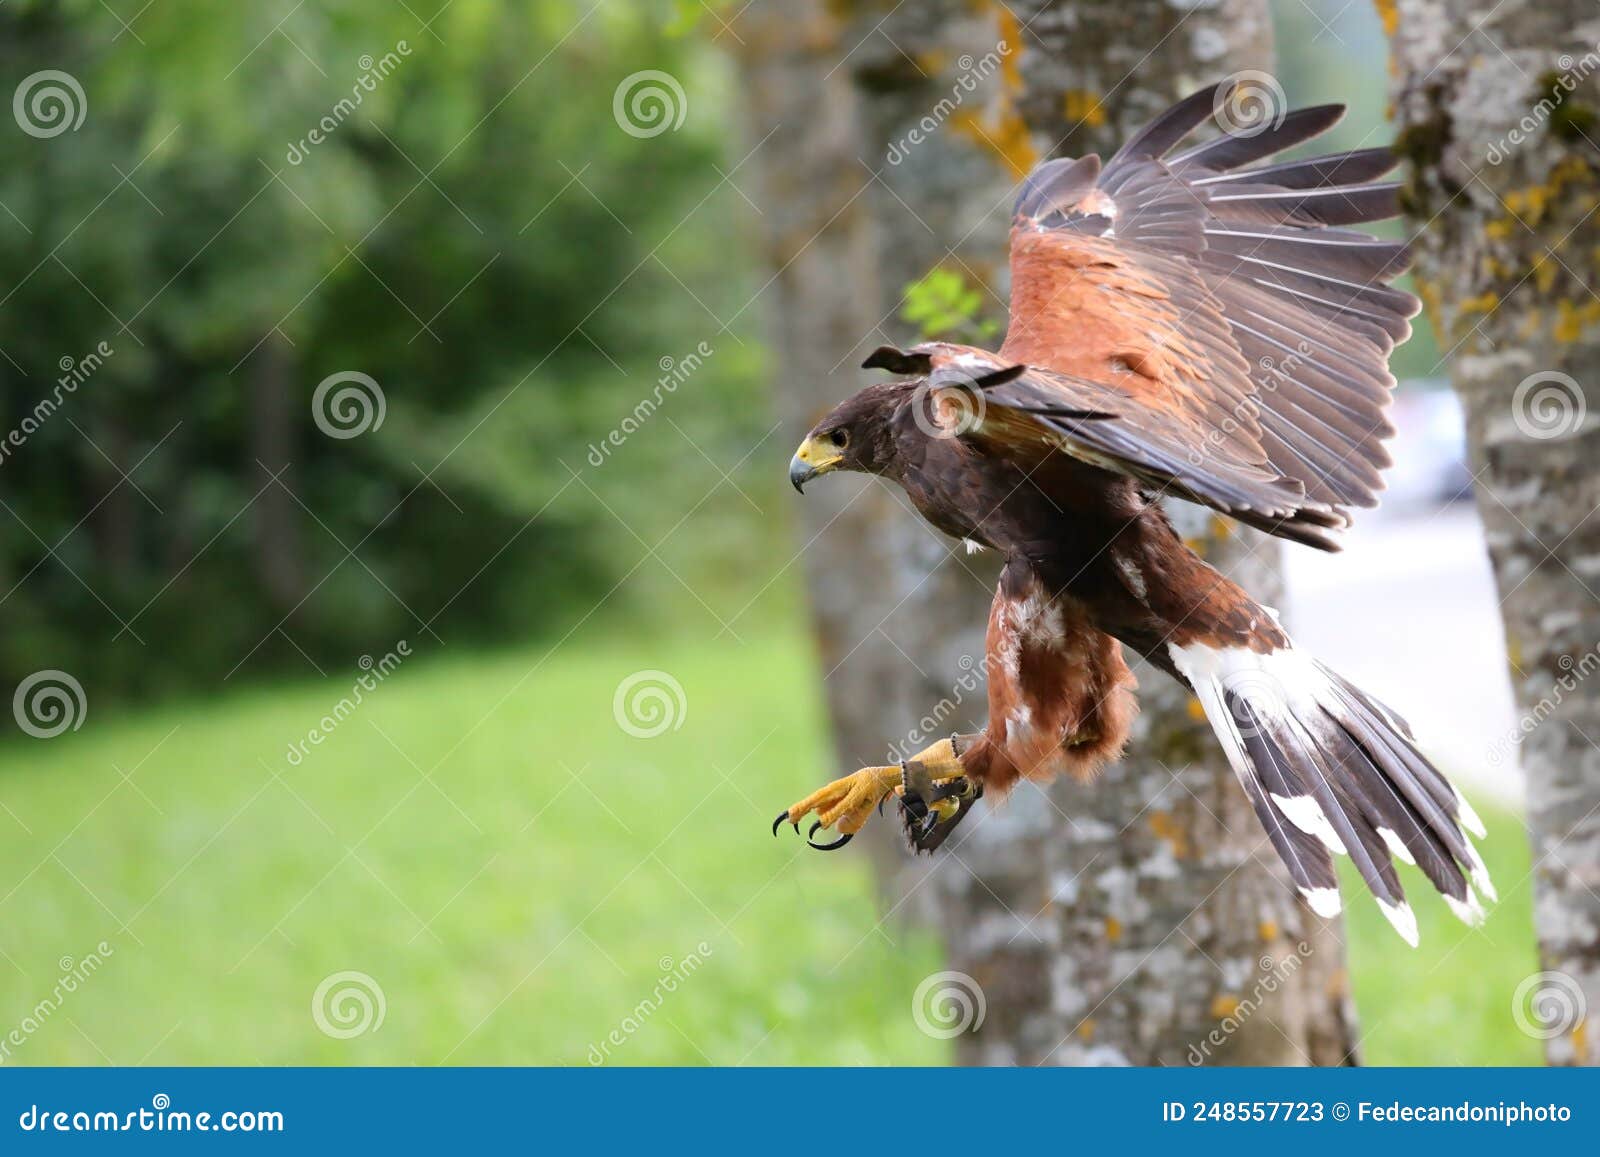 harris hawk also called buzzard is a rapacious bird with hooked